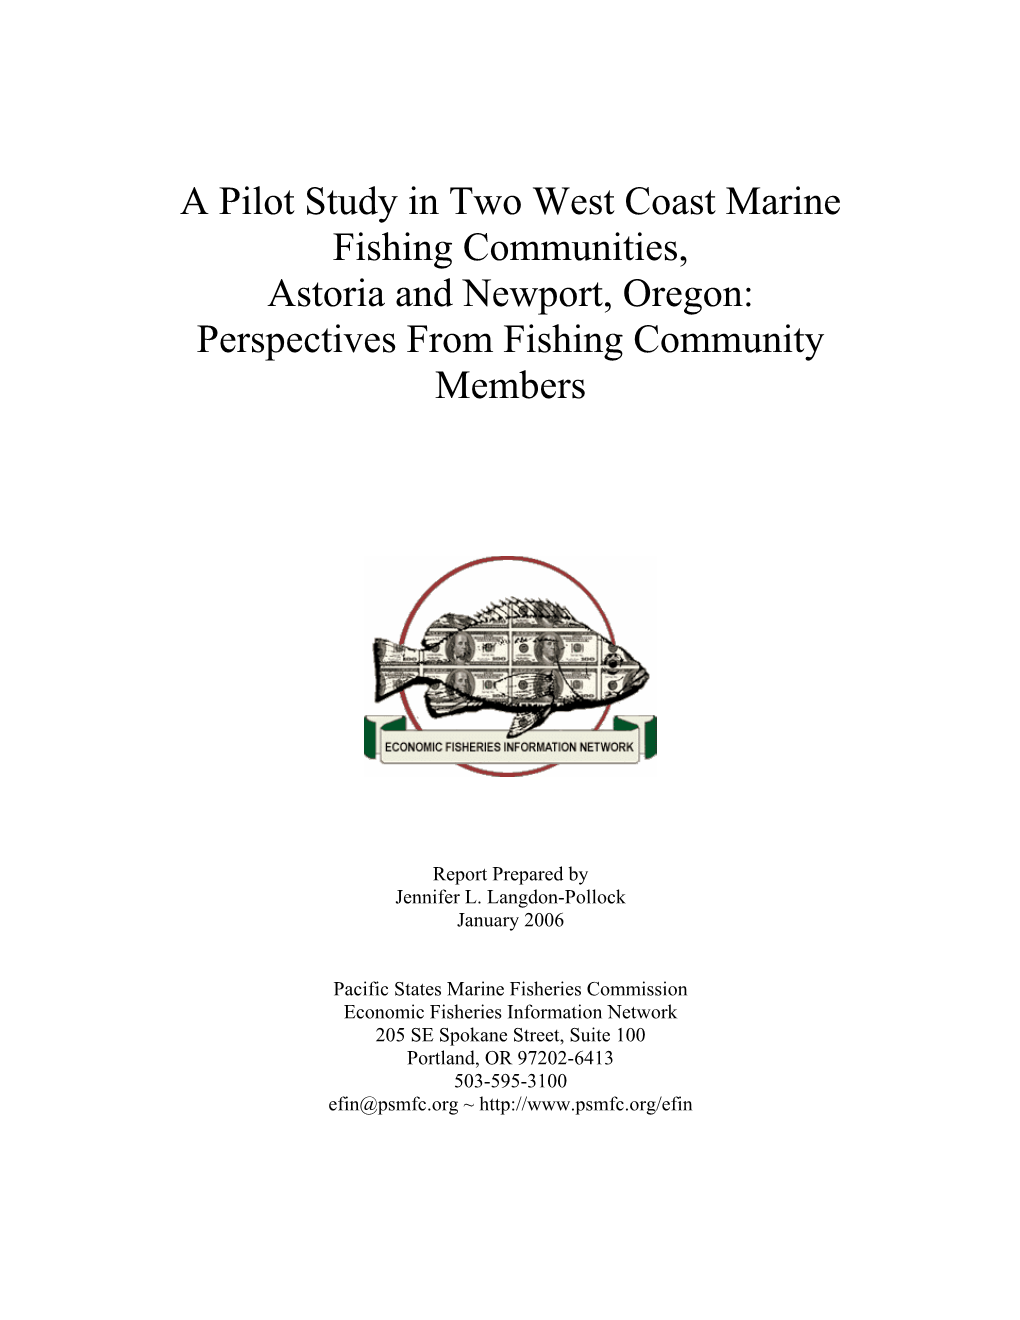 A Study in Two West Coast Marine Fishing Communities, Astoria And